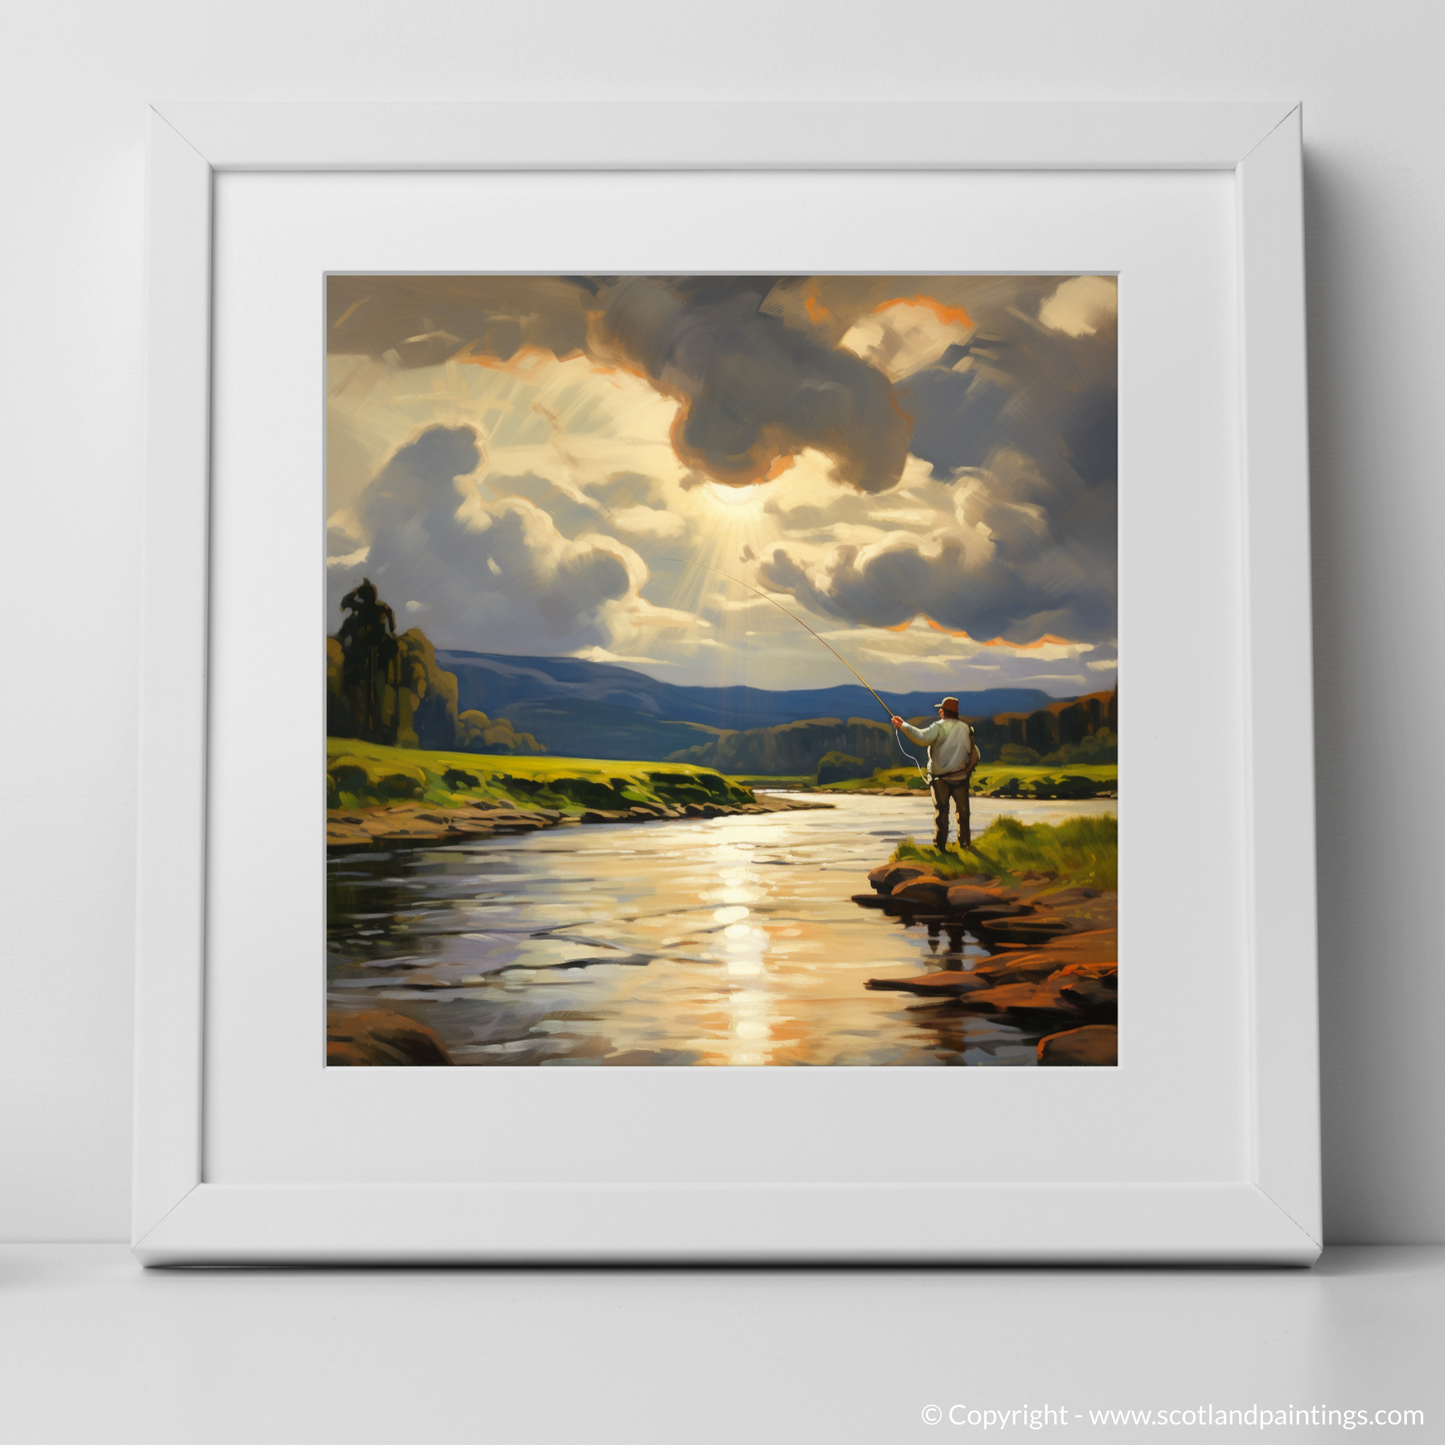 River Clyde Painting and Art Print. A Tranquil Interlude on the River Clyde